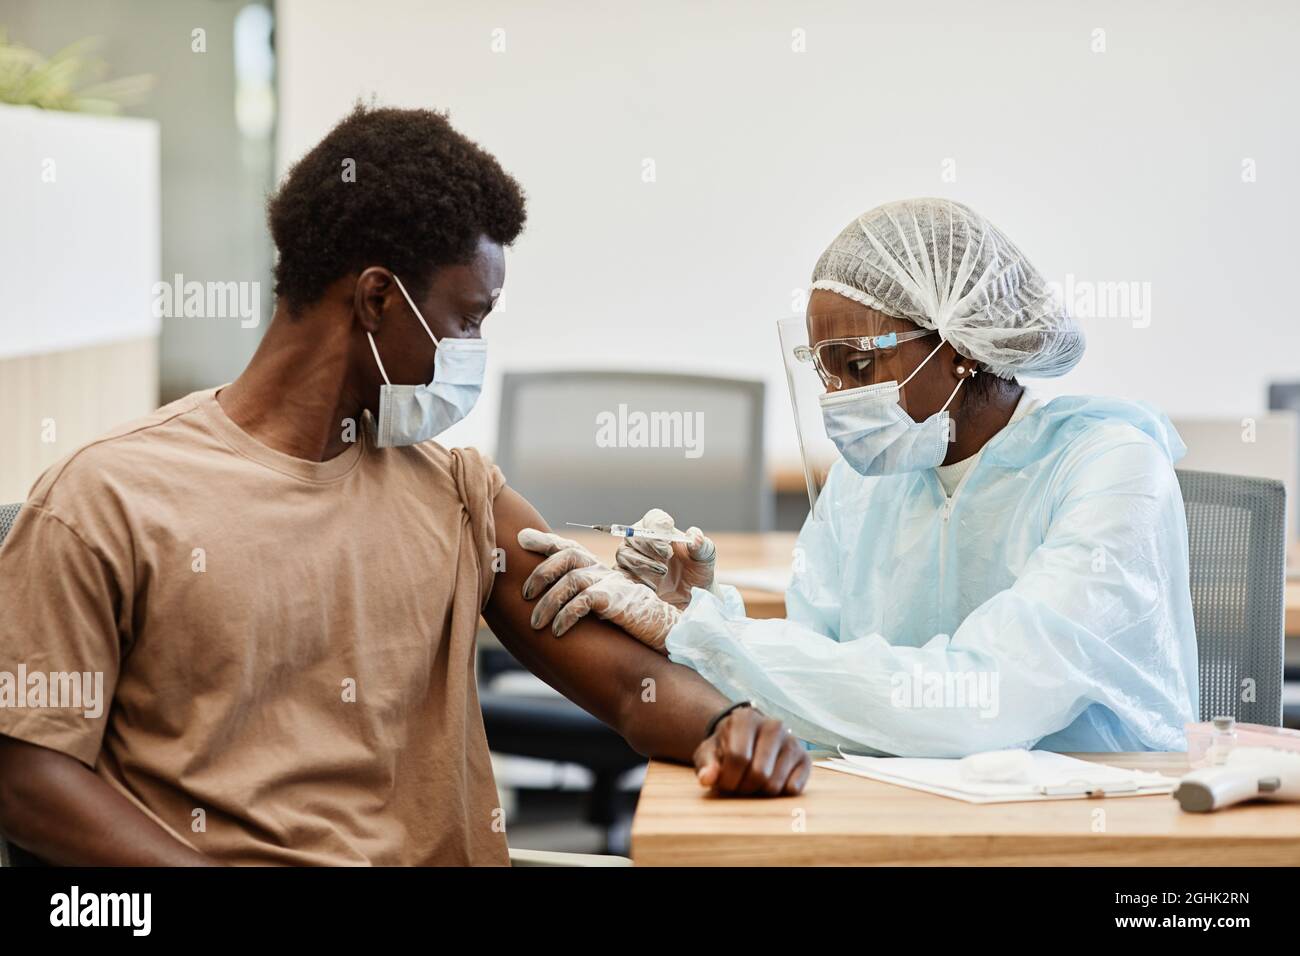 Young African-American man getting second shot of COVID-19 vaccine in hospital Stock Photo